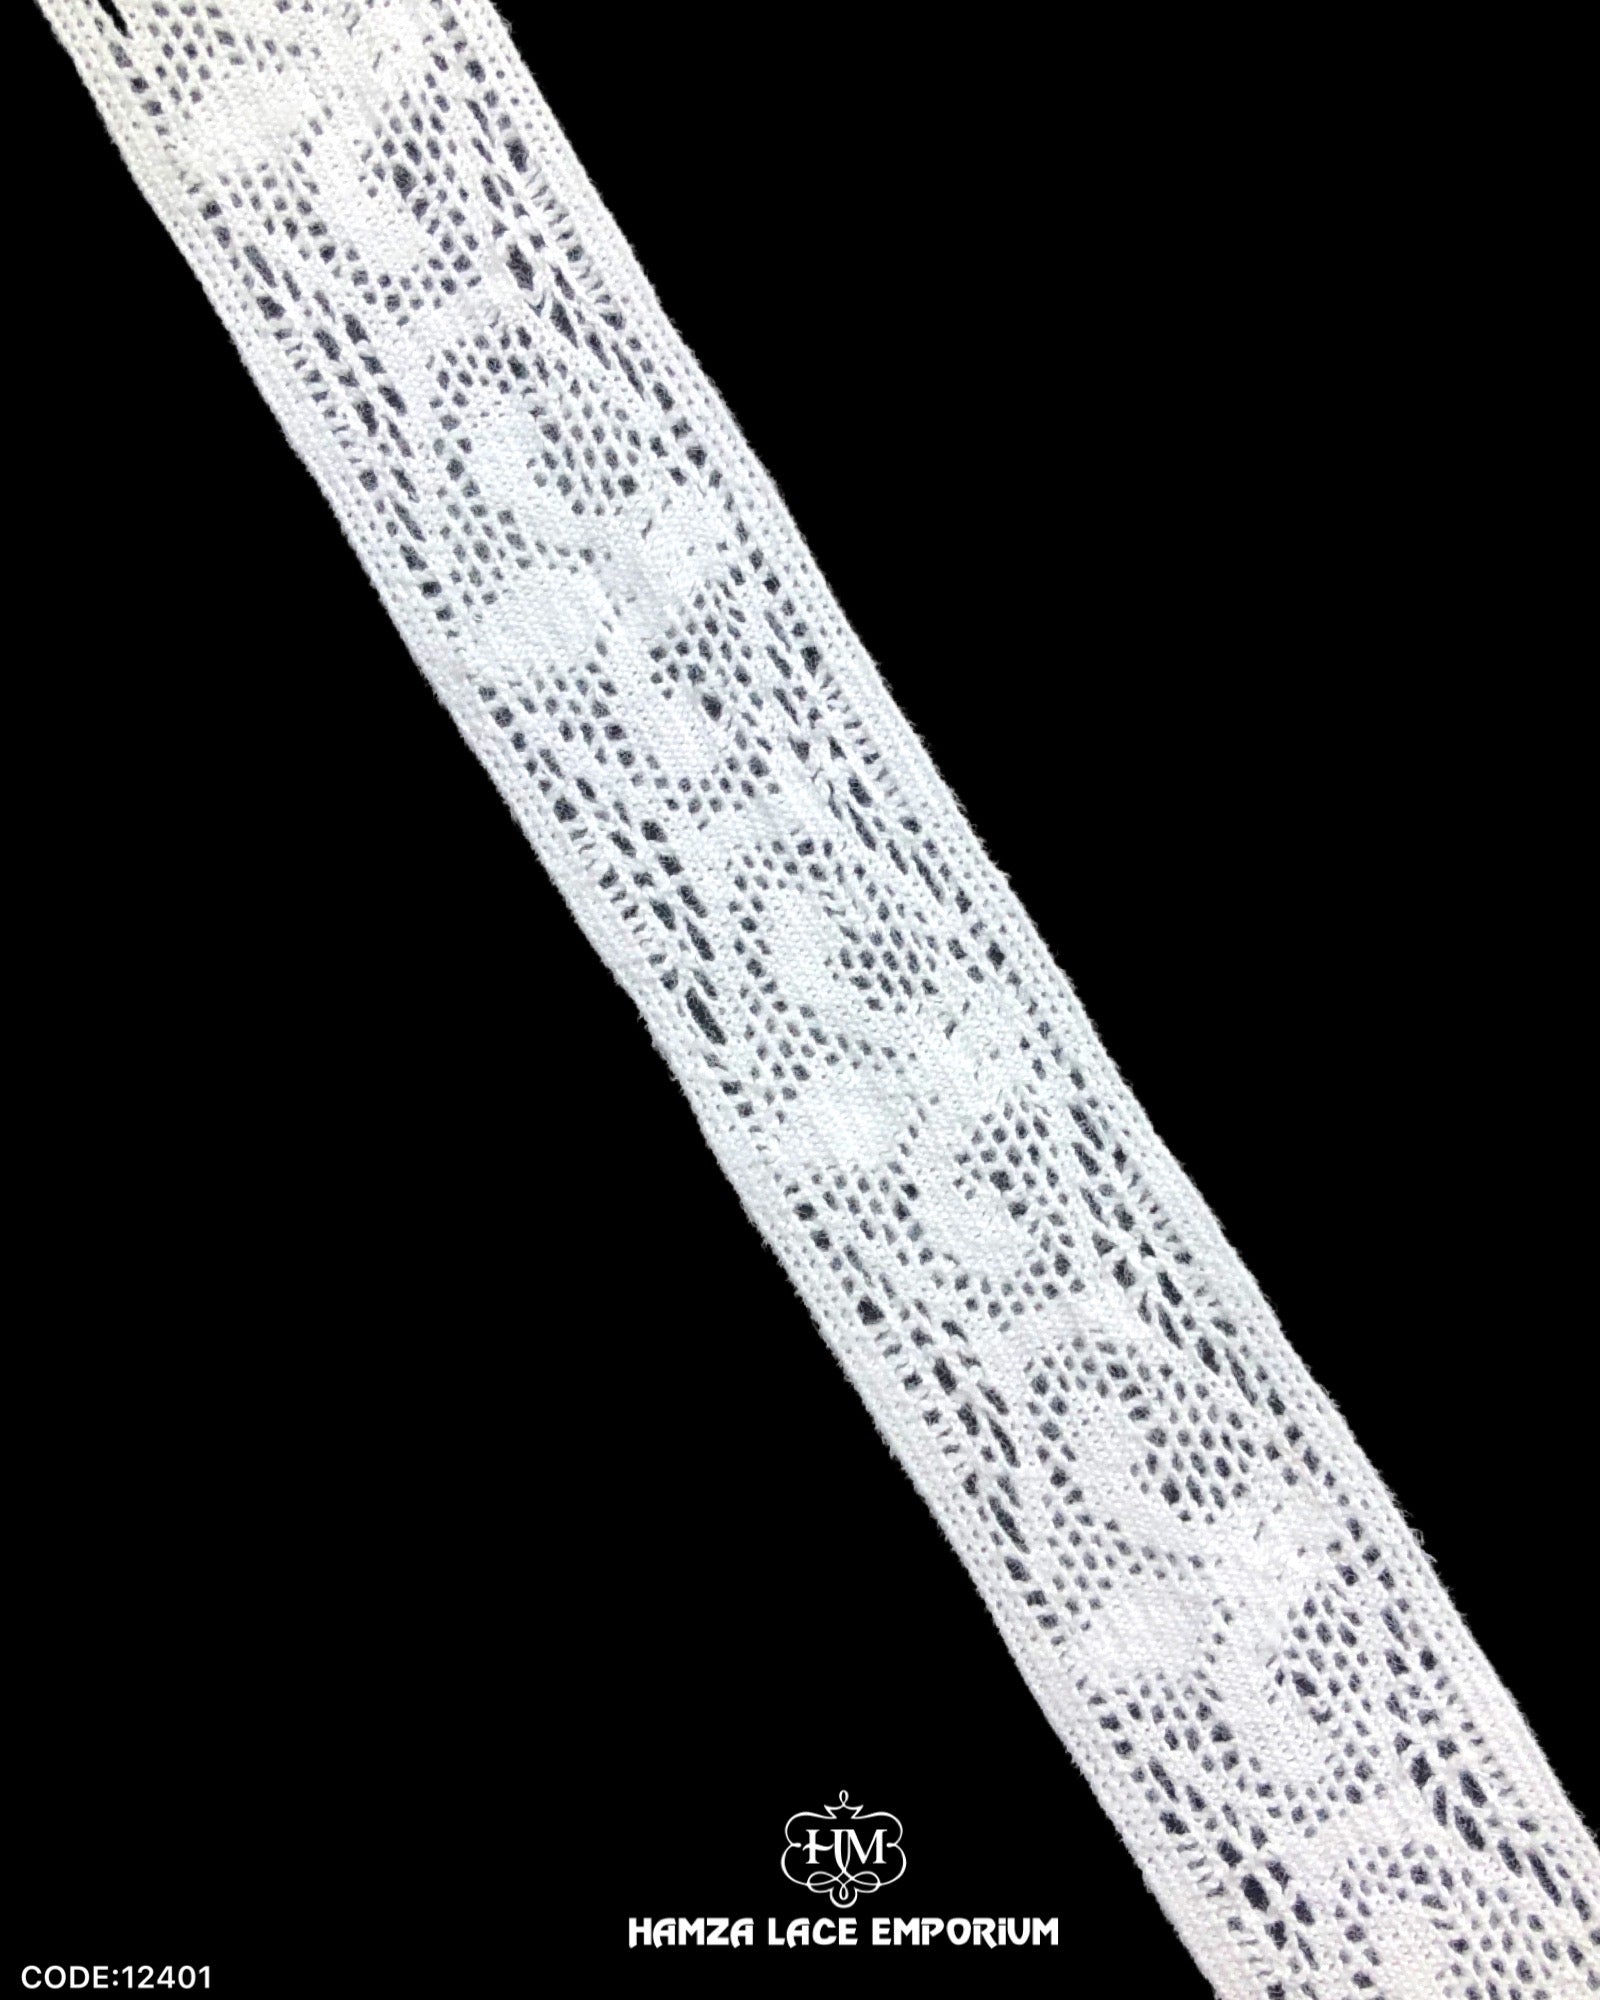 'Center Filling Crochet Lace 12401' with the name 'Hamza Lace' written at the bottom